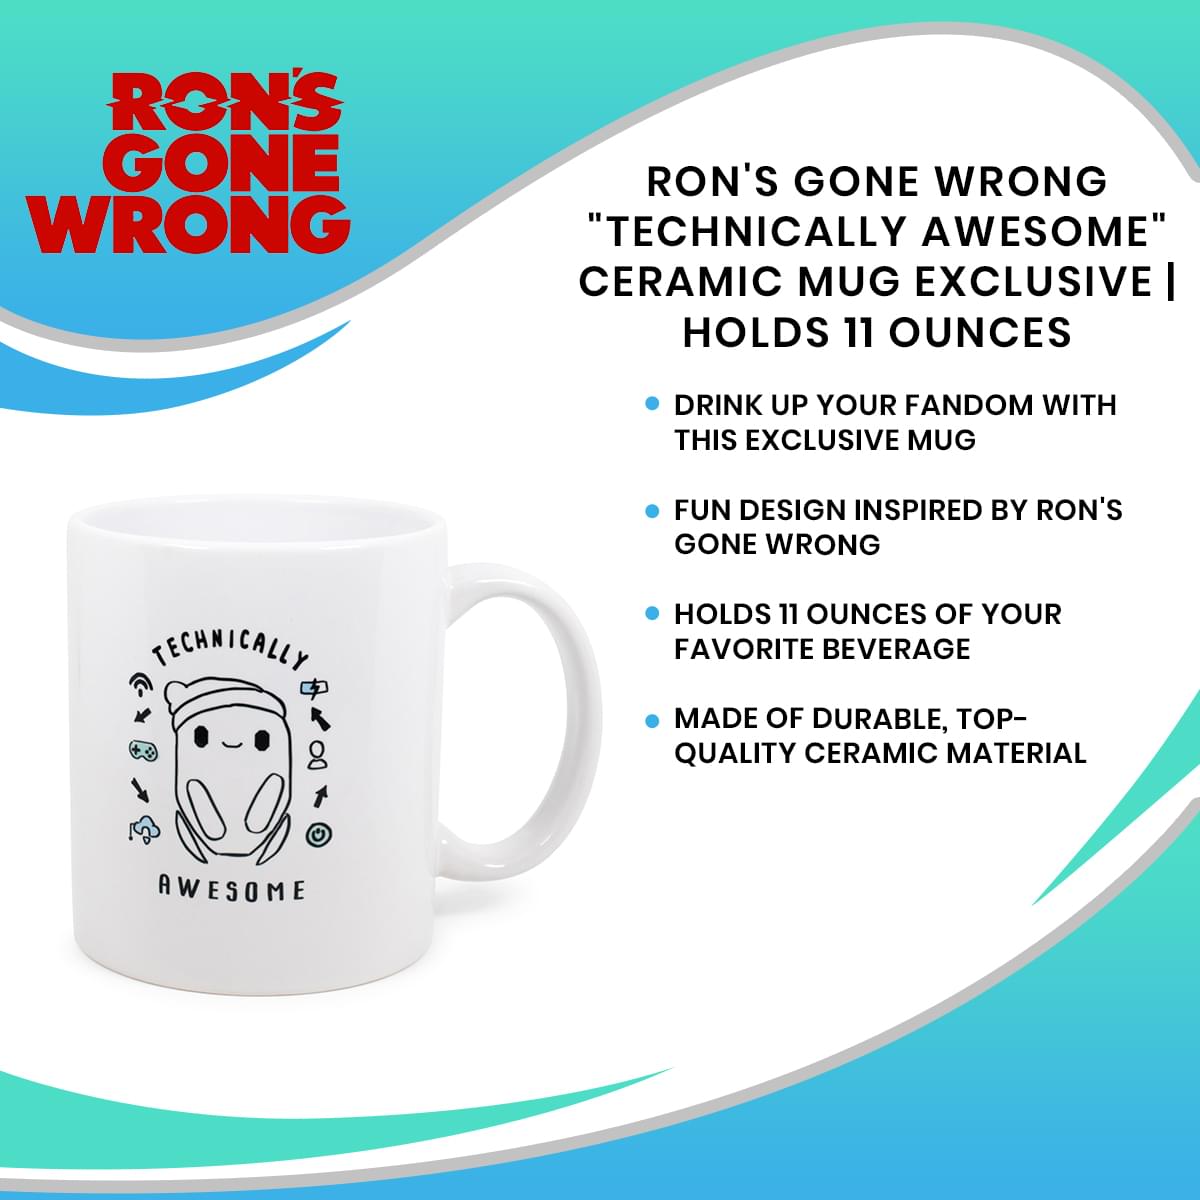 Ron's Gone Wrong "Technically Awesome" Ceramic Mug Exclusive | Holds 11 Ounces